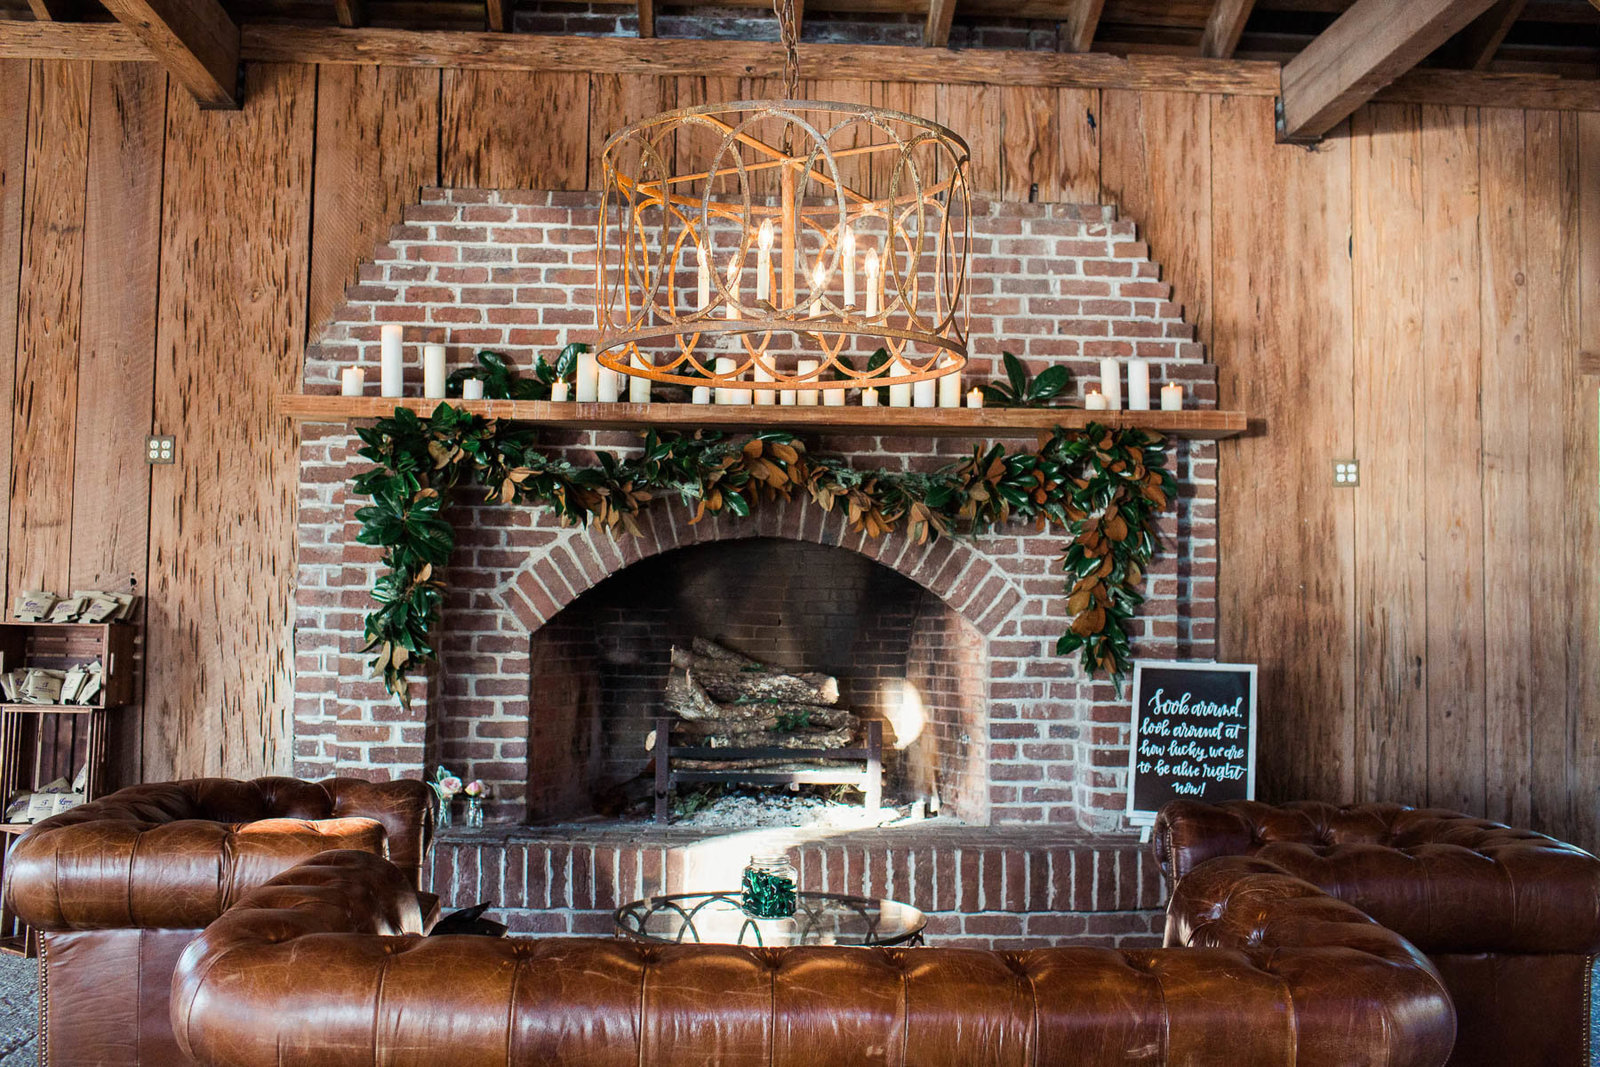 Cotton Dock fireplace is decorated with candles and garland, Boone Hall Plantation, Charleston, South Carolina